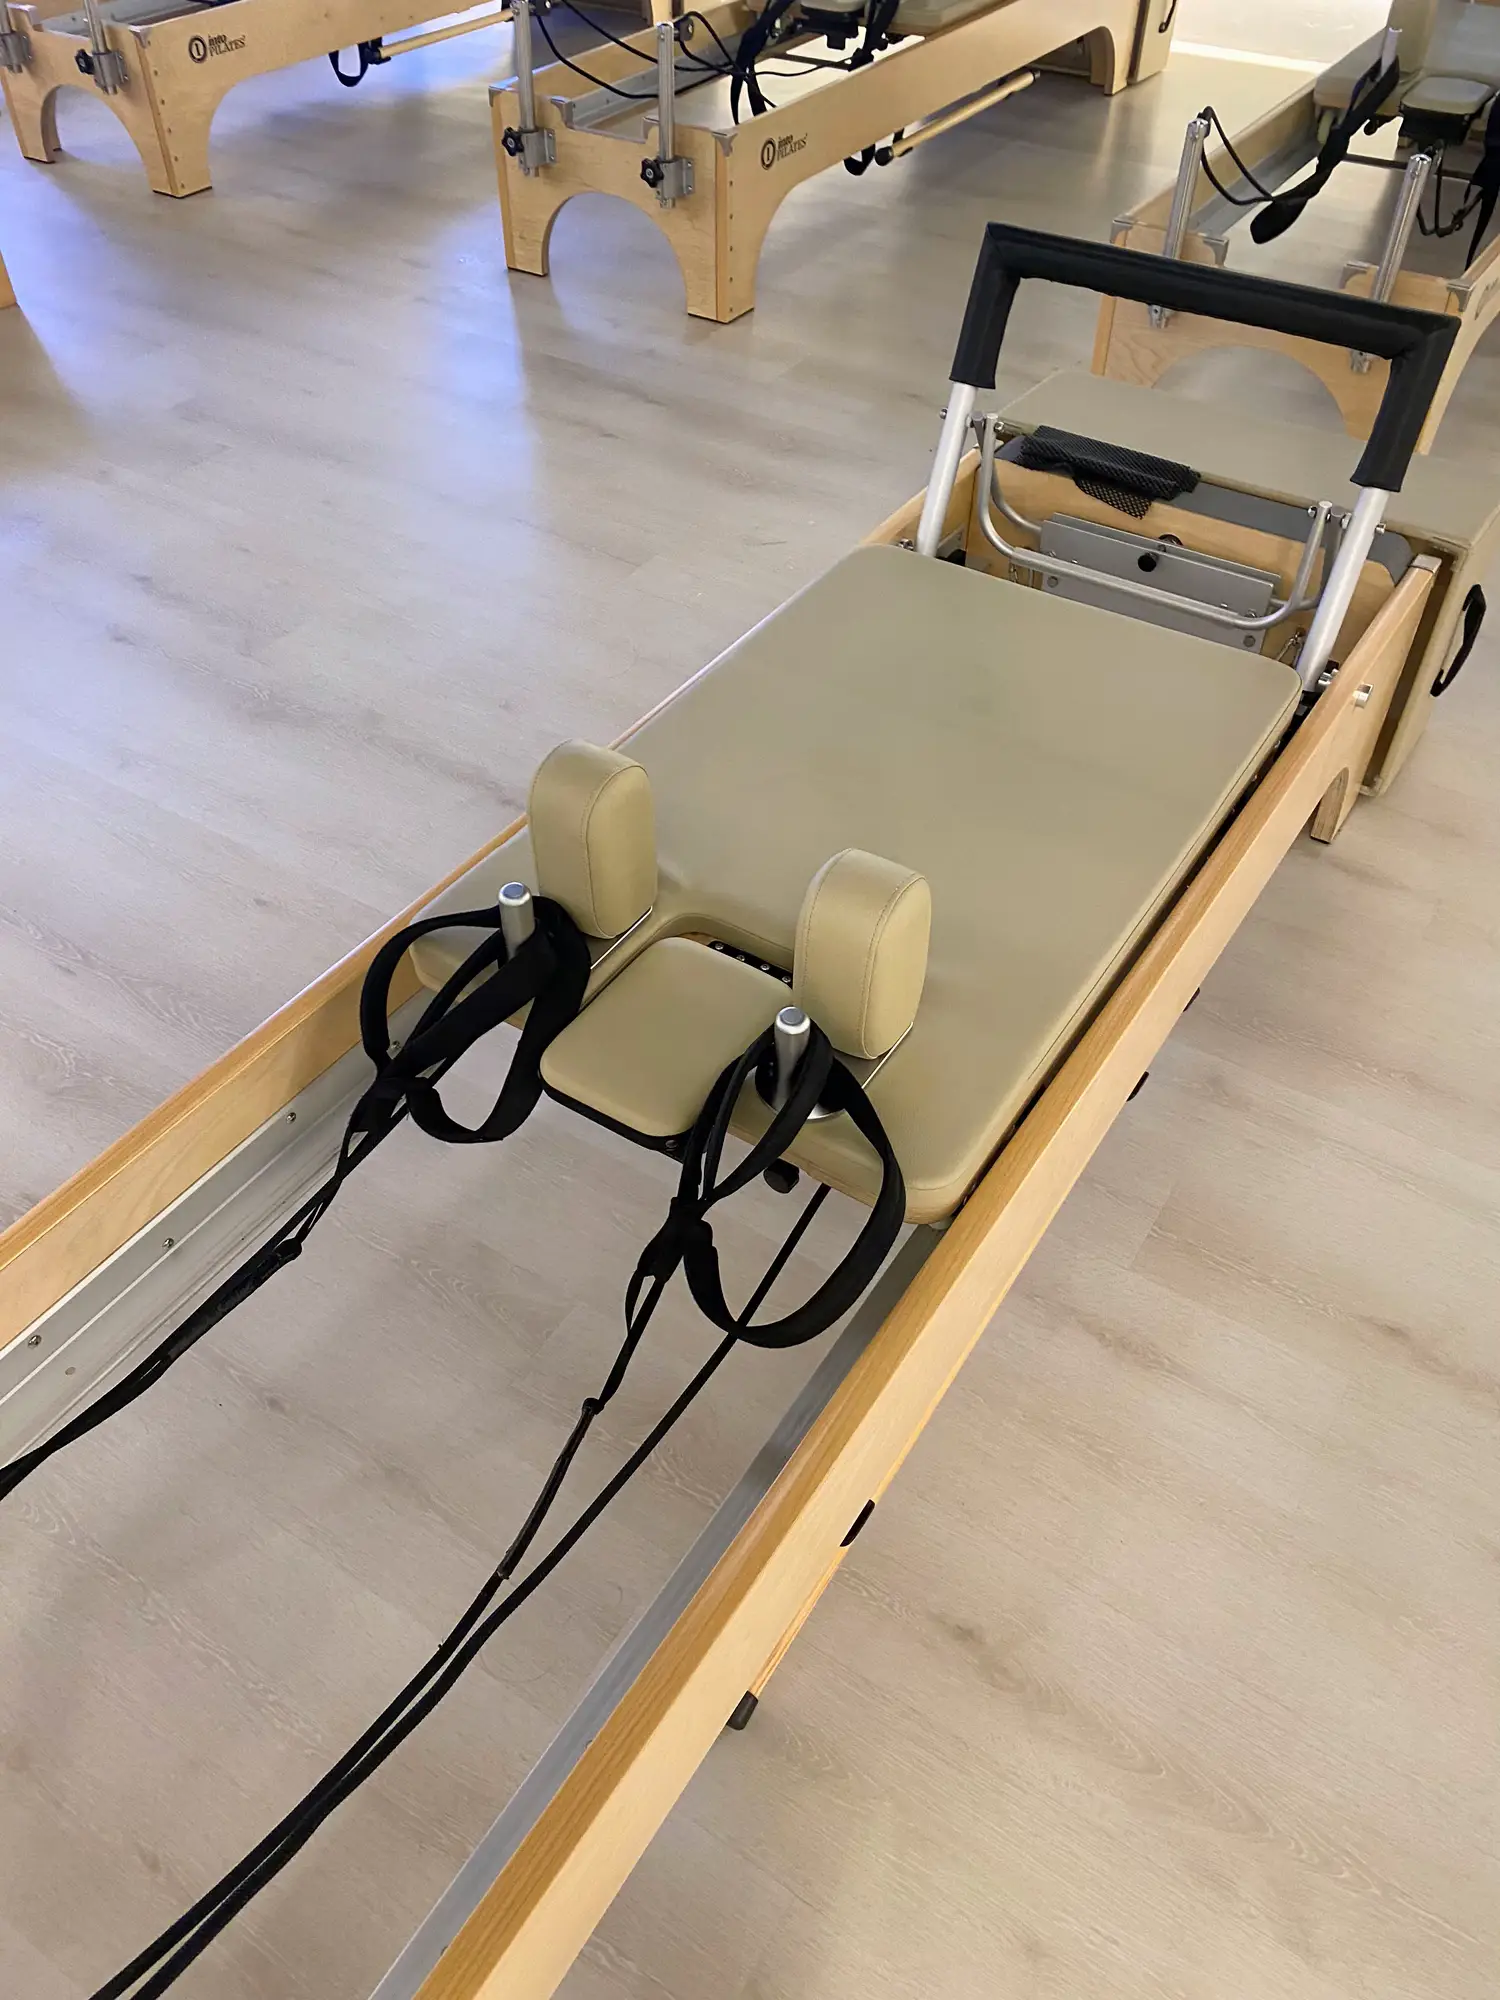 Reformer Pilates @ Line Pilates, Gallery posted by heytdelilah